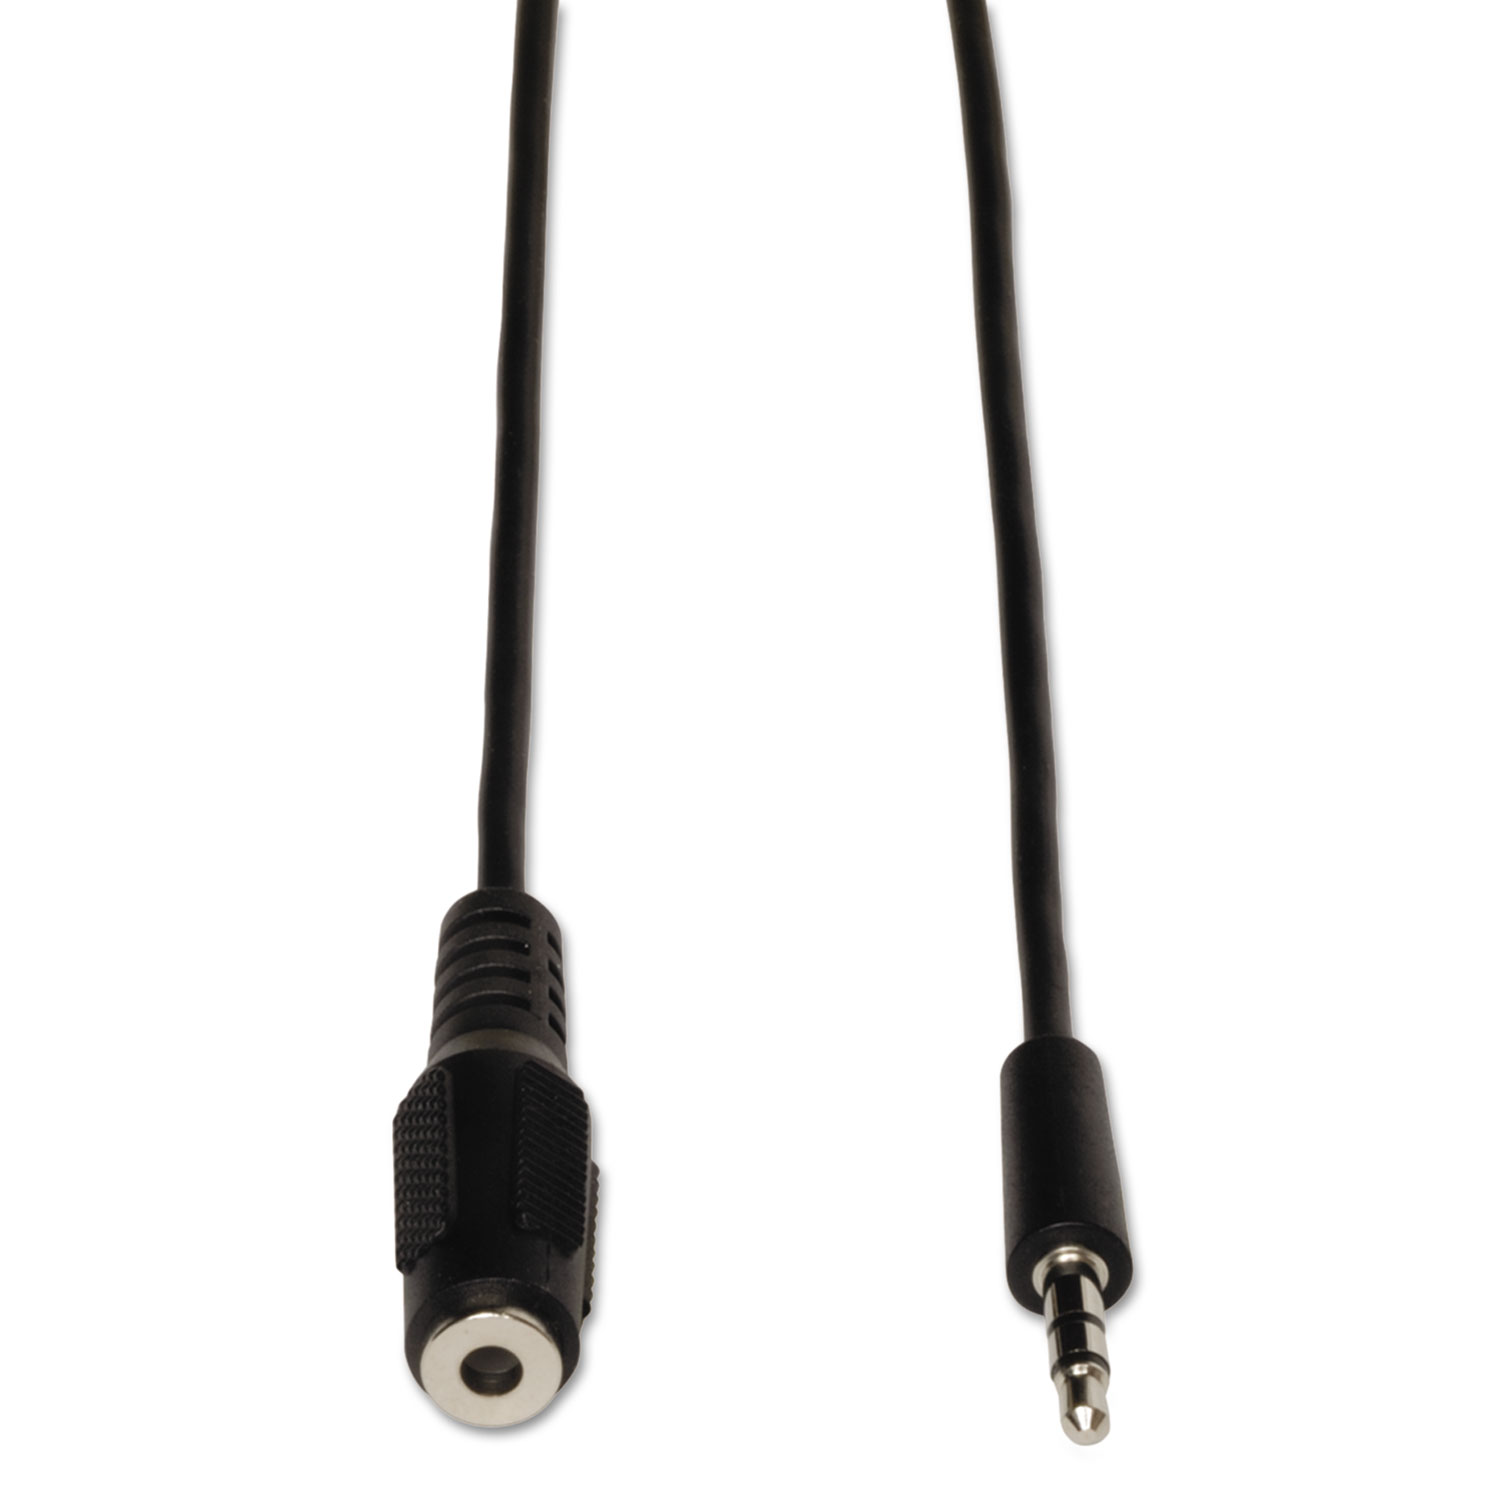  Tripp Lite P311-006 3.5mm Mini Stereo Audio Extension Cable for Speakers and Headphones (M/F), 6 ft. (TRPP311006) 